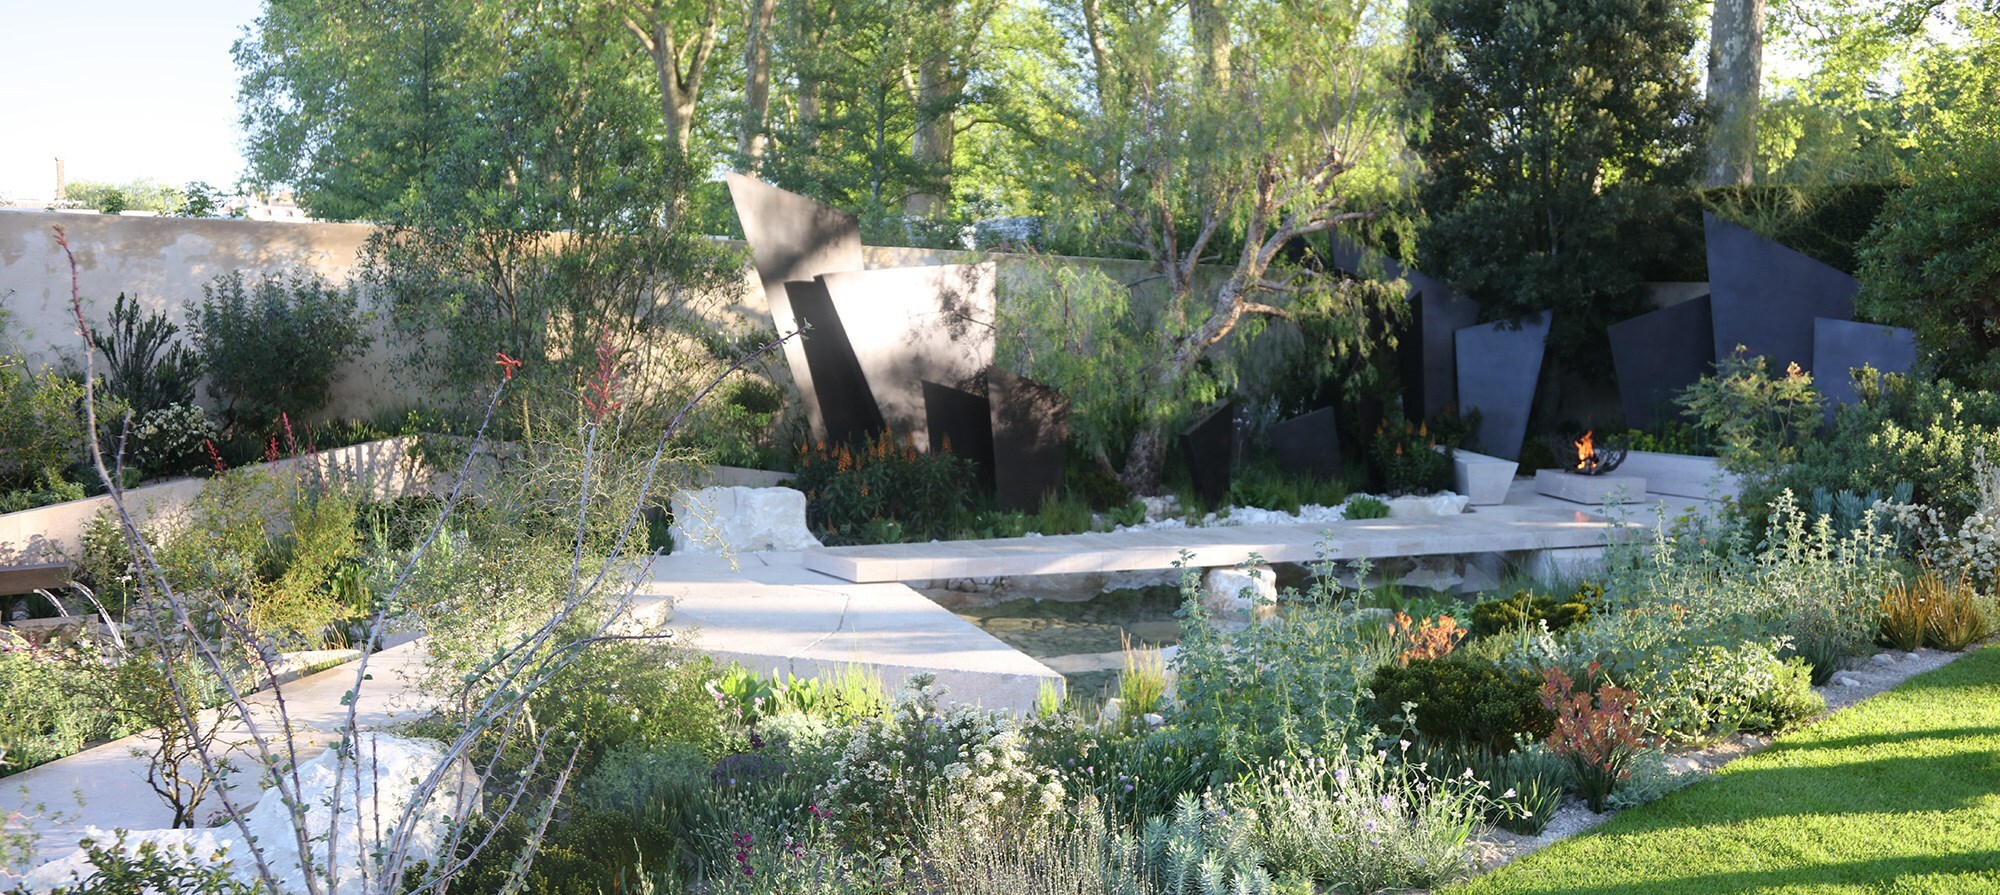 The Daily Telegraph Garden designed by Andy Sturgeon